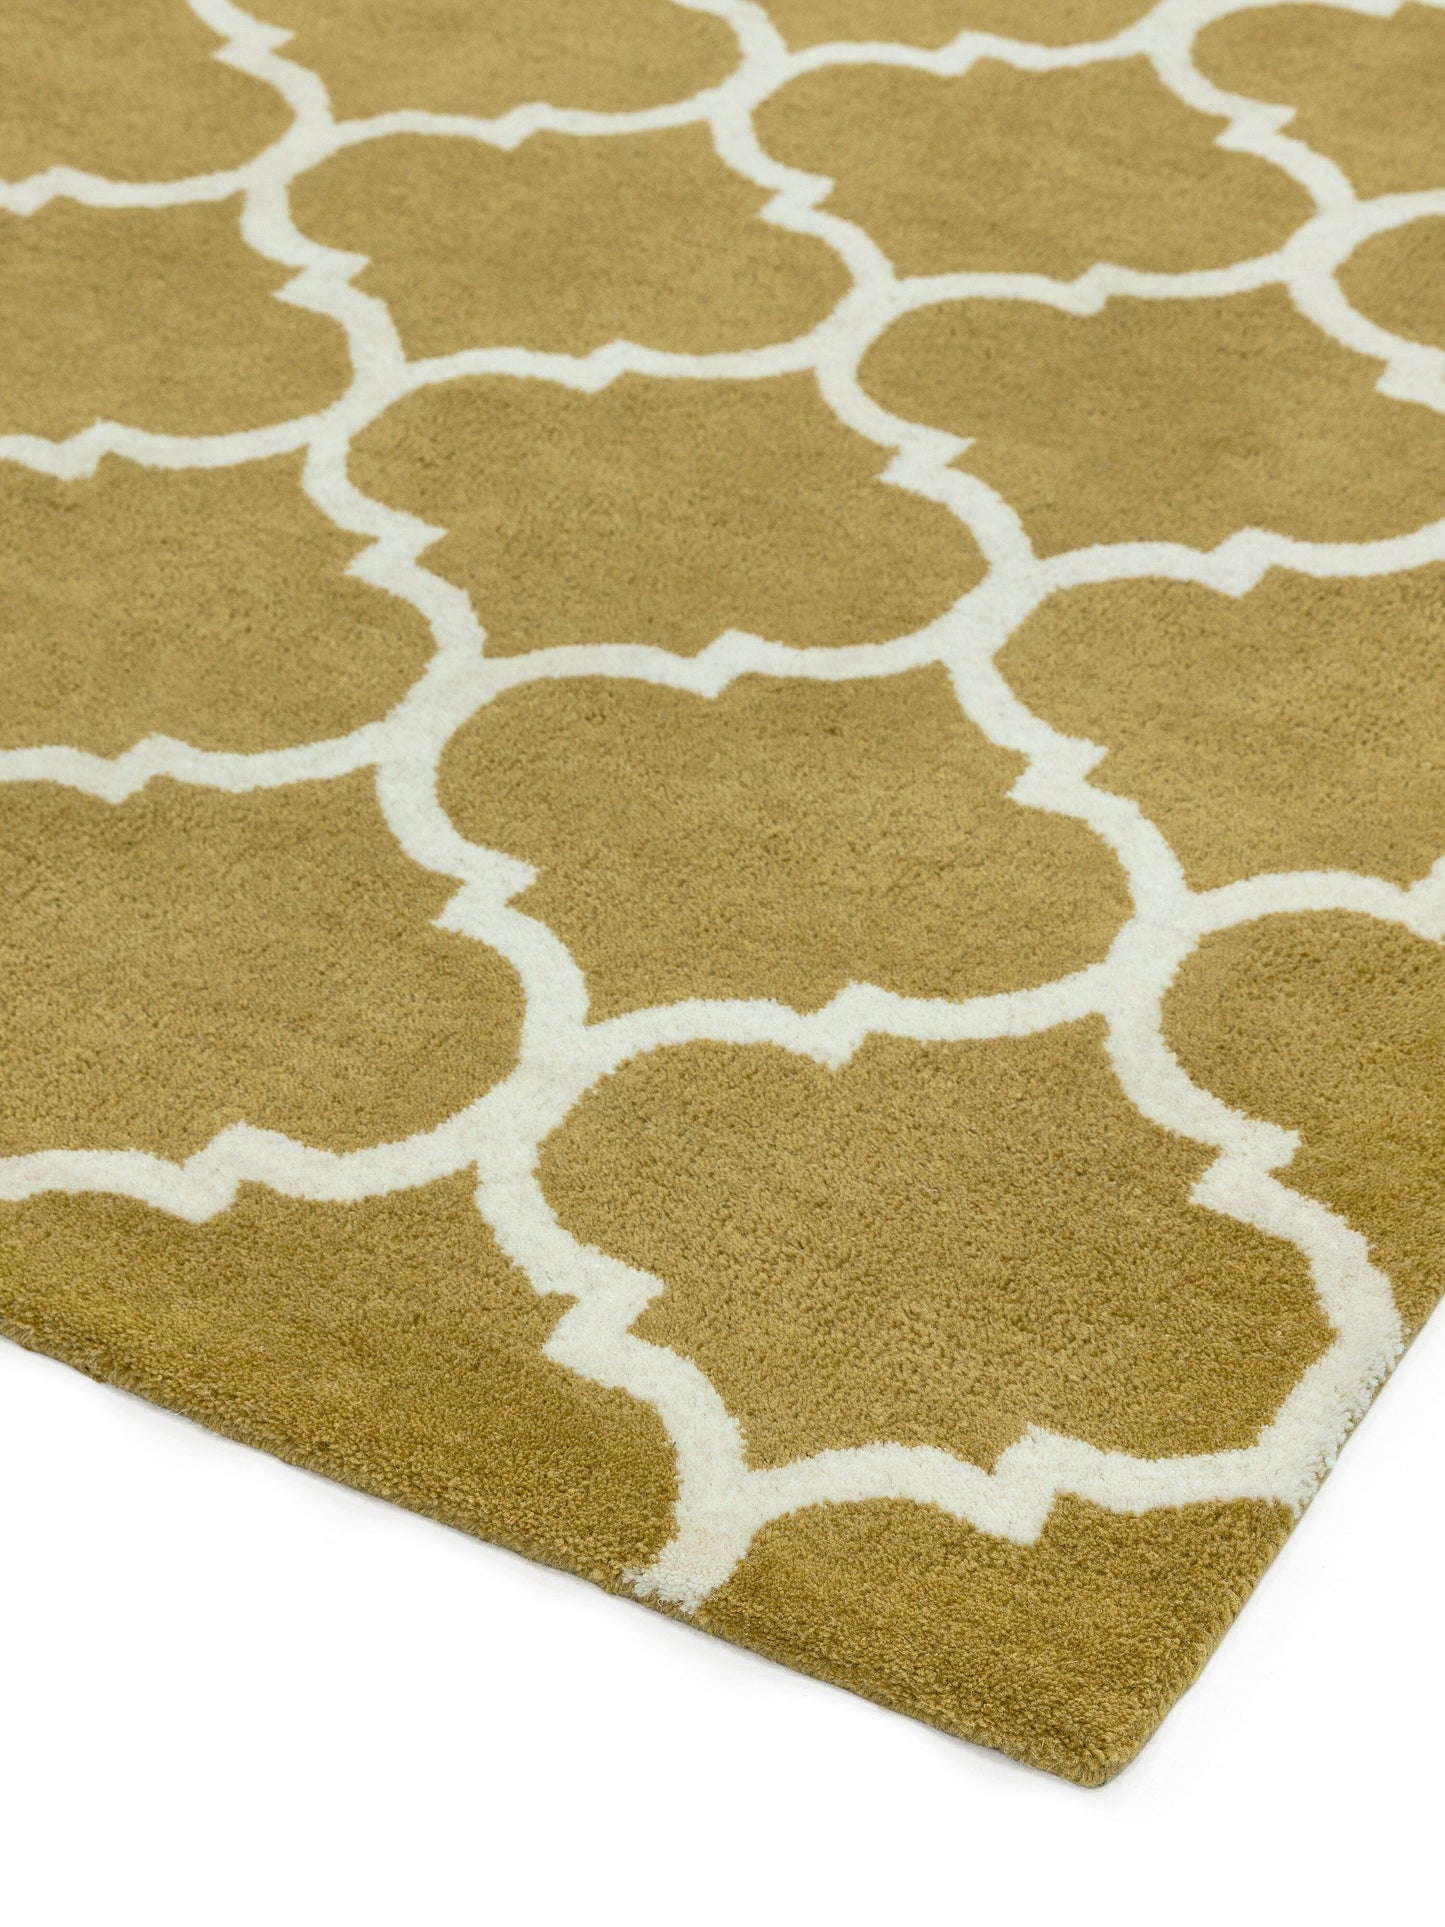 Asiatic Carpets Albany Handtufted Rug Ogee Ochre - 160 x 230cm